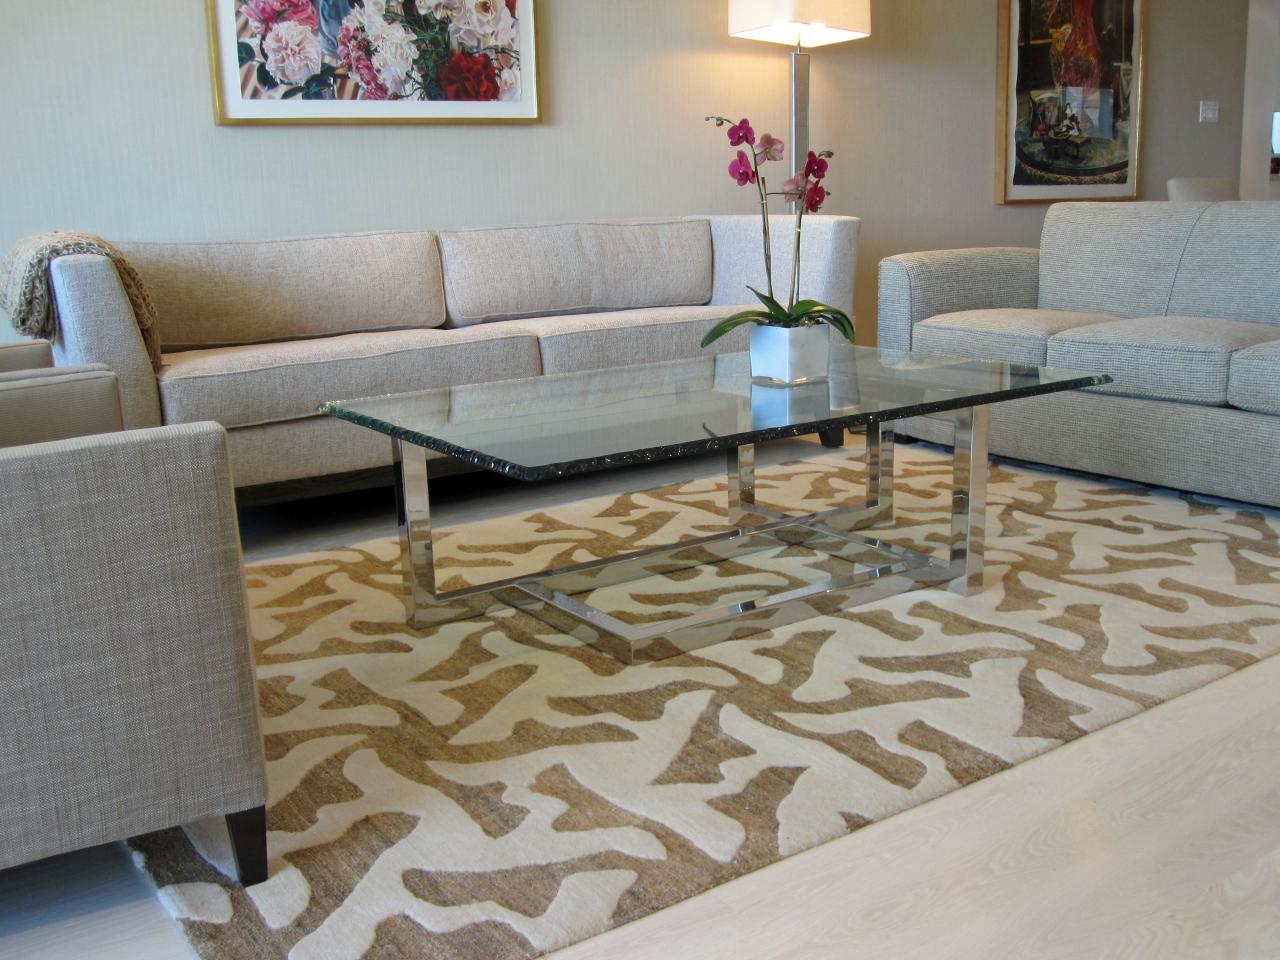 How To Choose Your Living Room Rug, How To Pick A Rug For Your Living Room